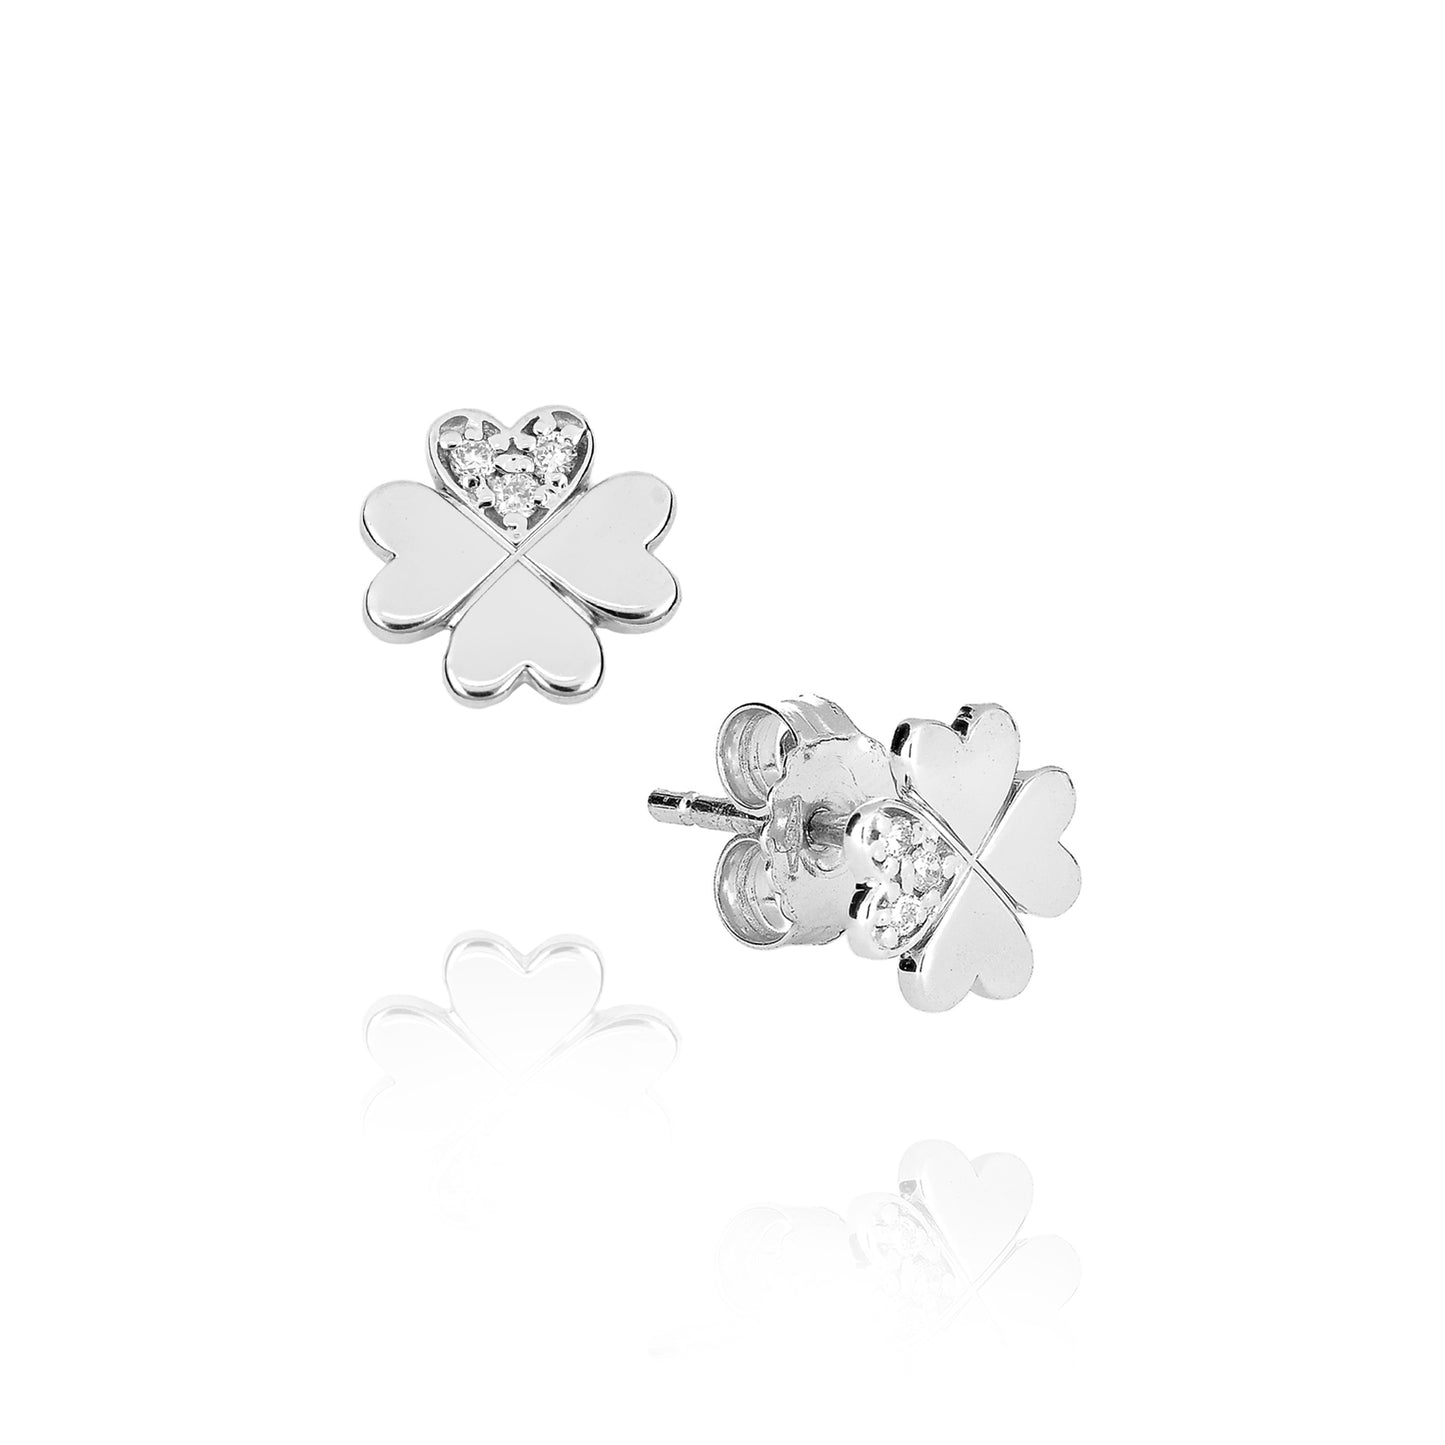 Real Gold Fortuna Earrings with 100% Natural Diamonds P.Ct 4 